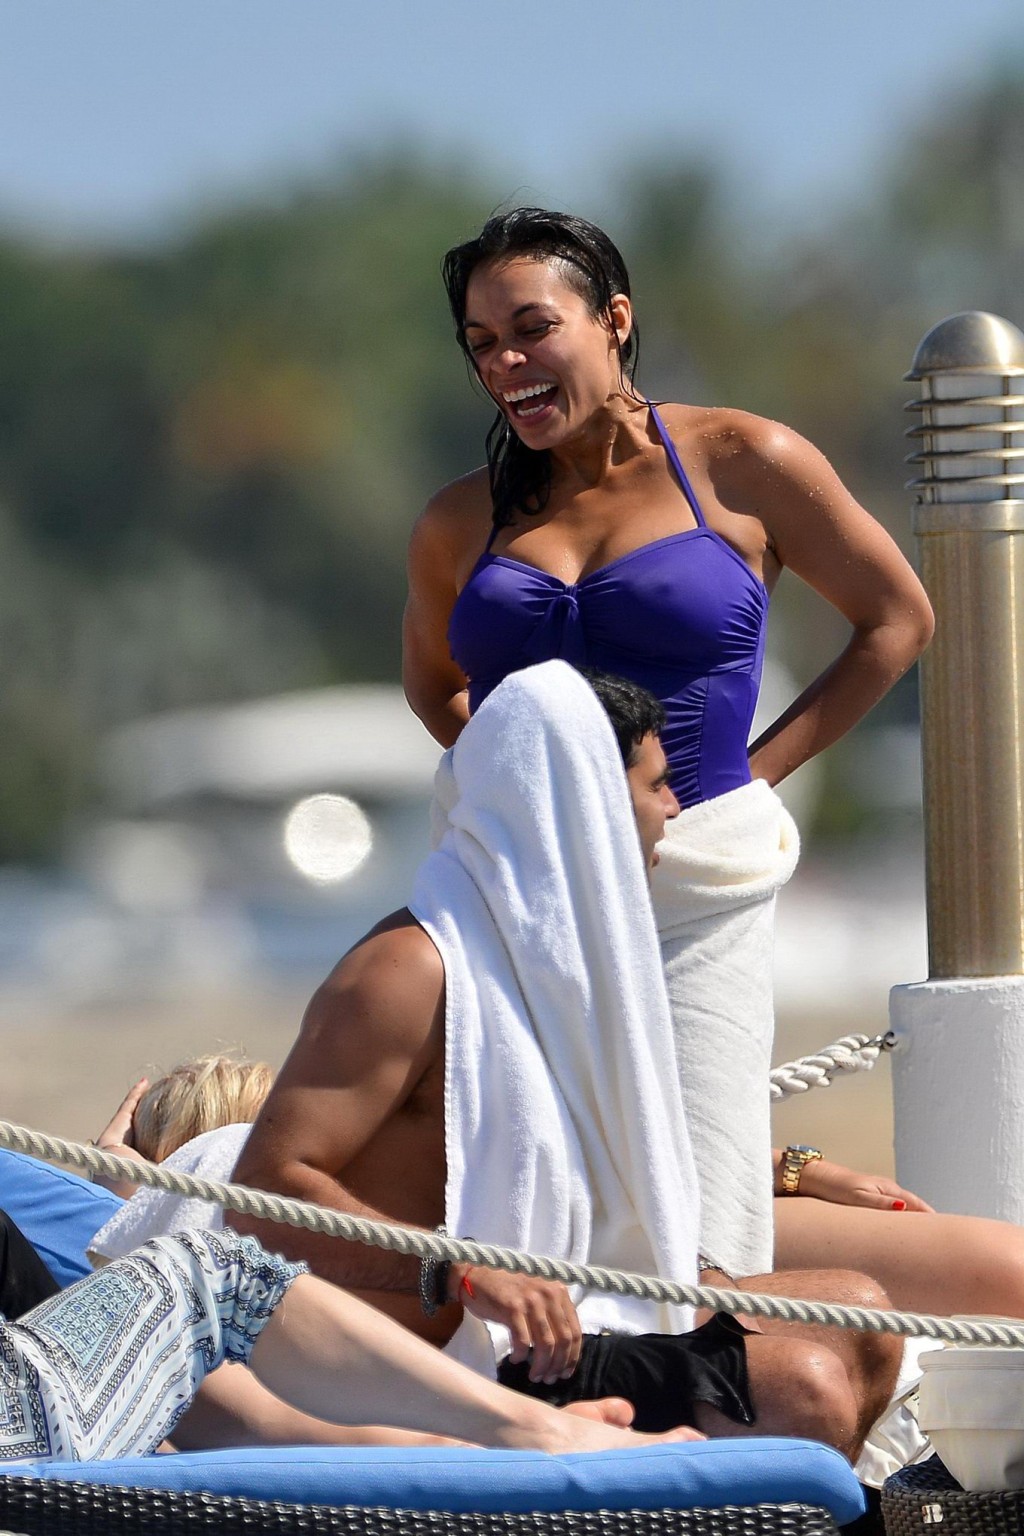 Rosario Dawson shows off her chubby body wearing a purple swimsuit  on the pier  #75193520